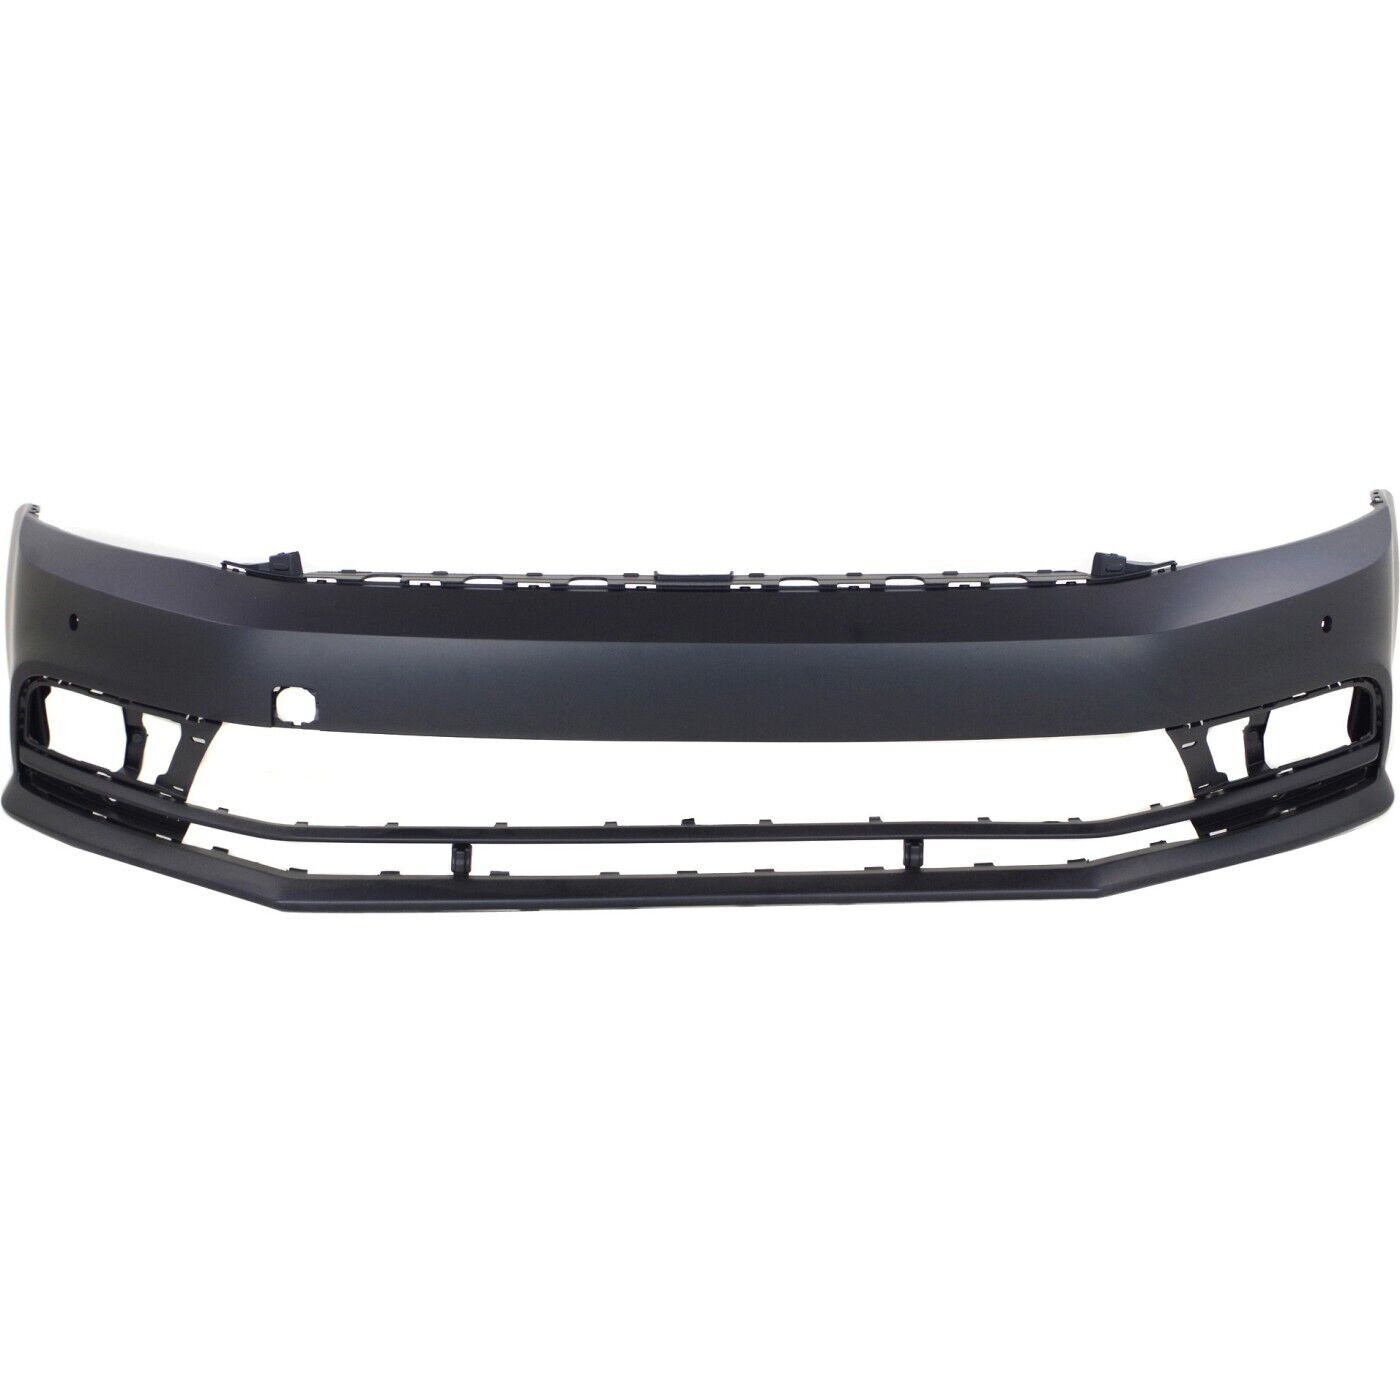 New Bumper Cover Fascia Front for VW Volkswagen Jetta CH1100981 5C6807217NGRU